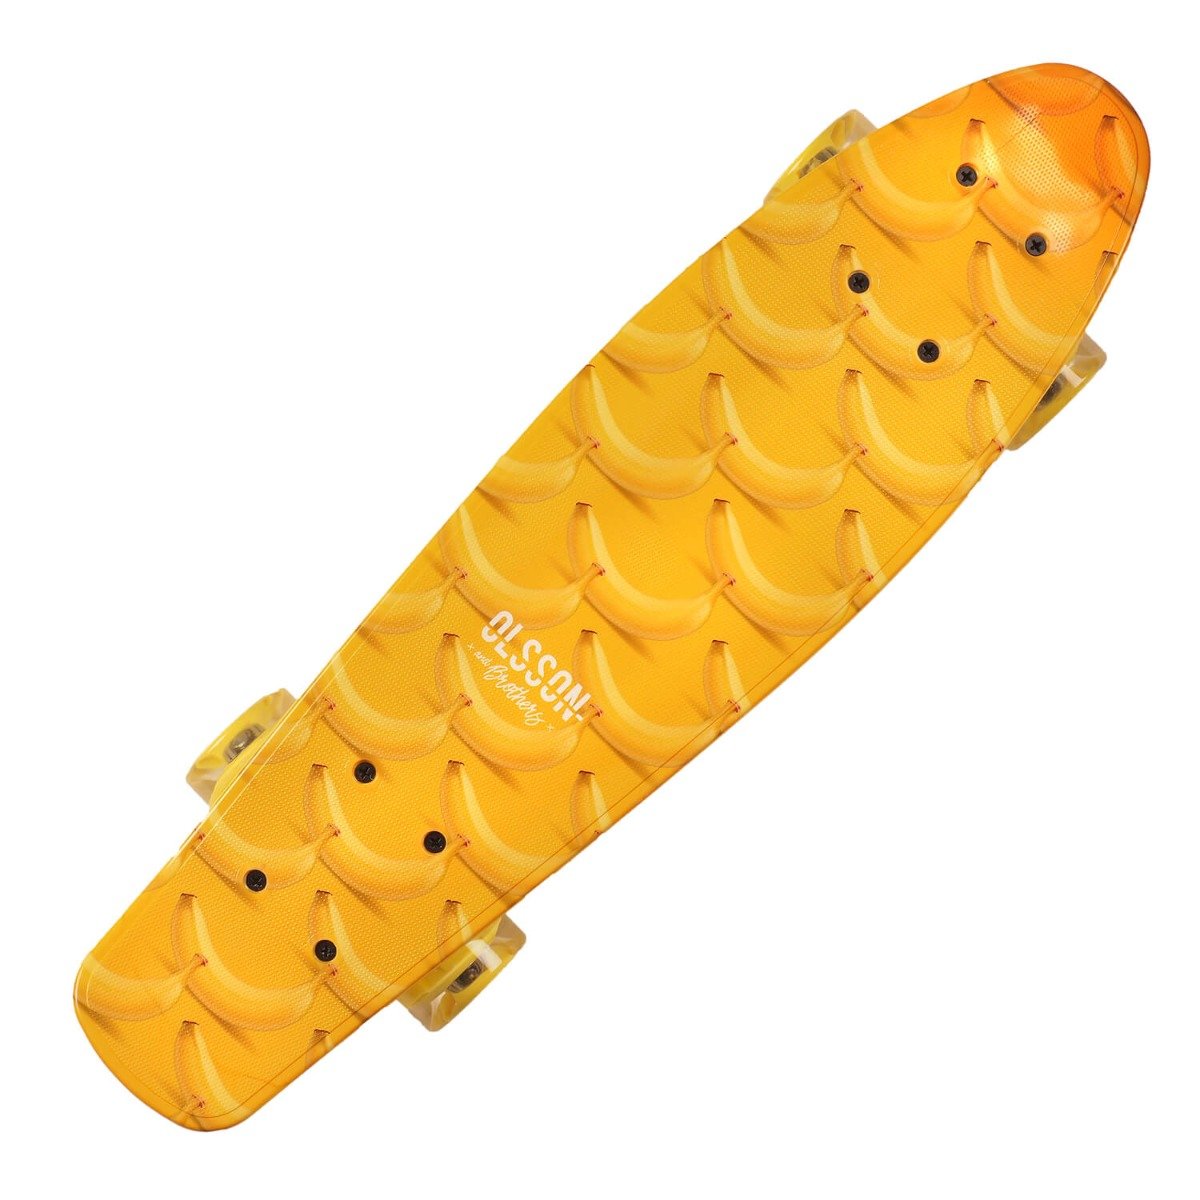 Penny Board cu roti luminoase Action One, 22 inch, 90 Kg, Banana Action One